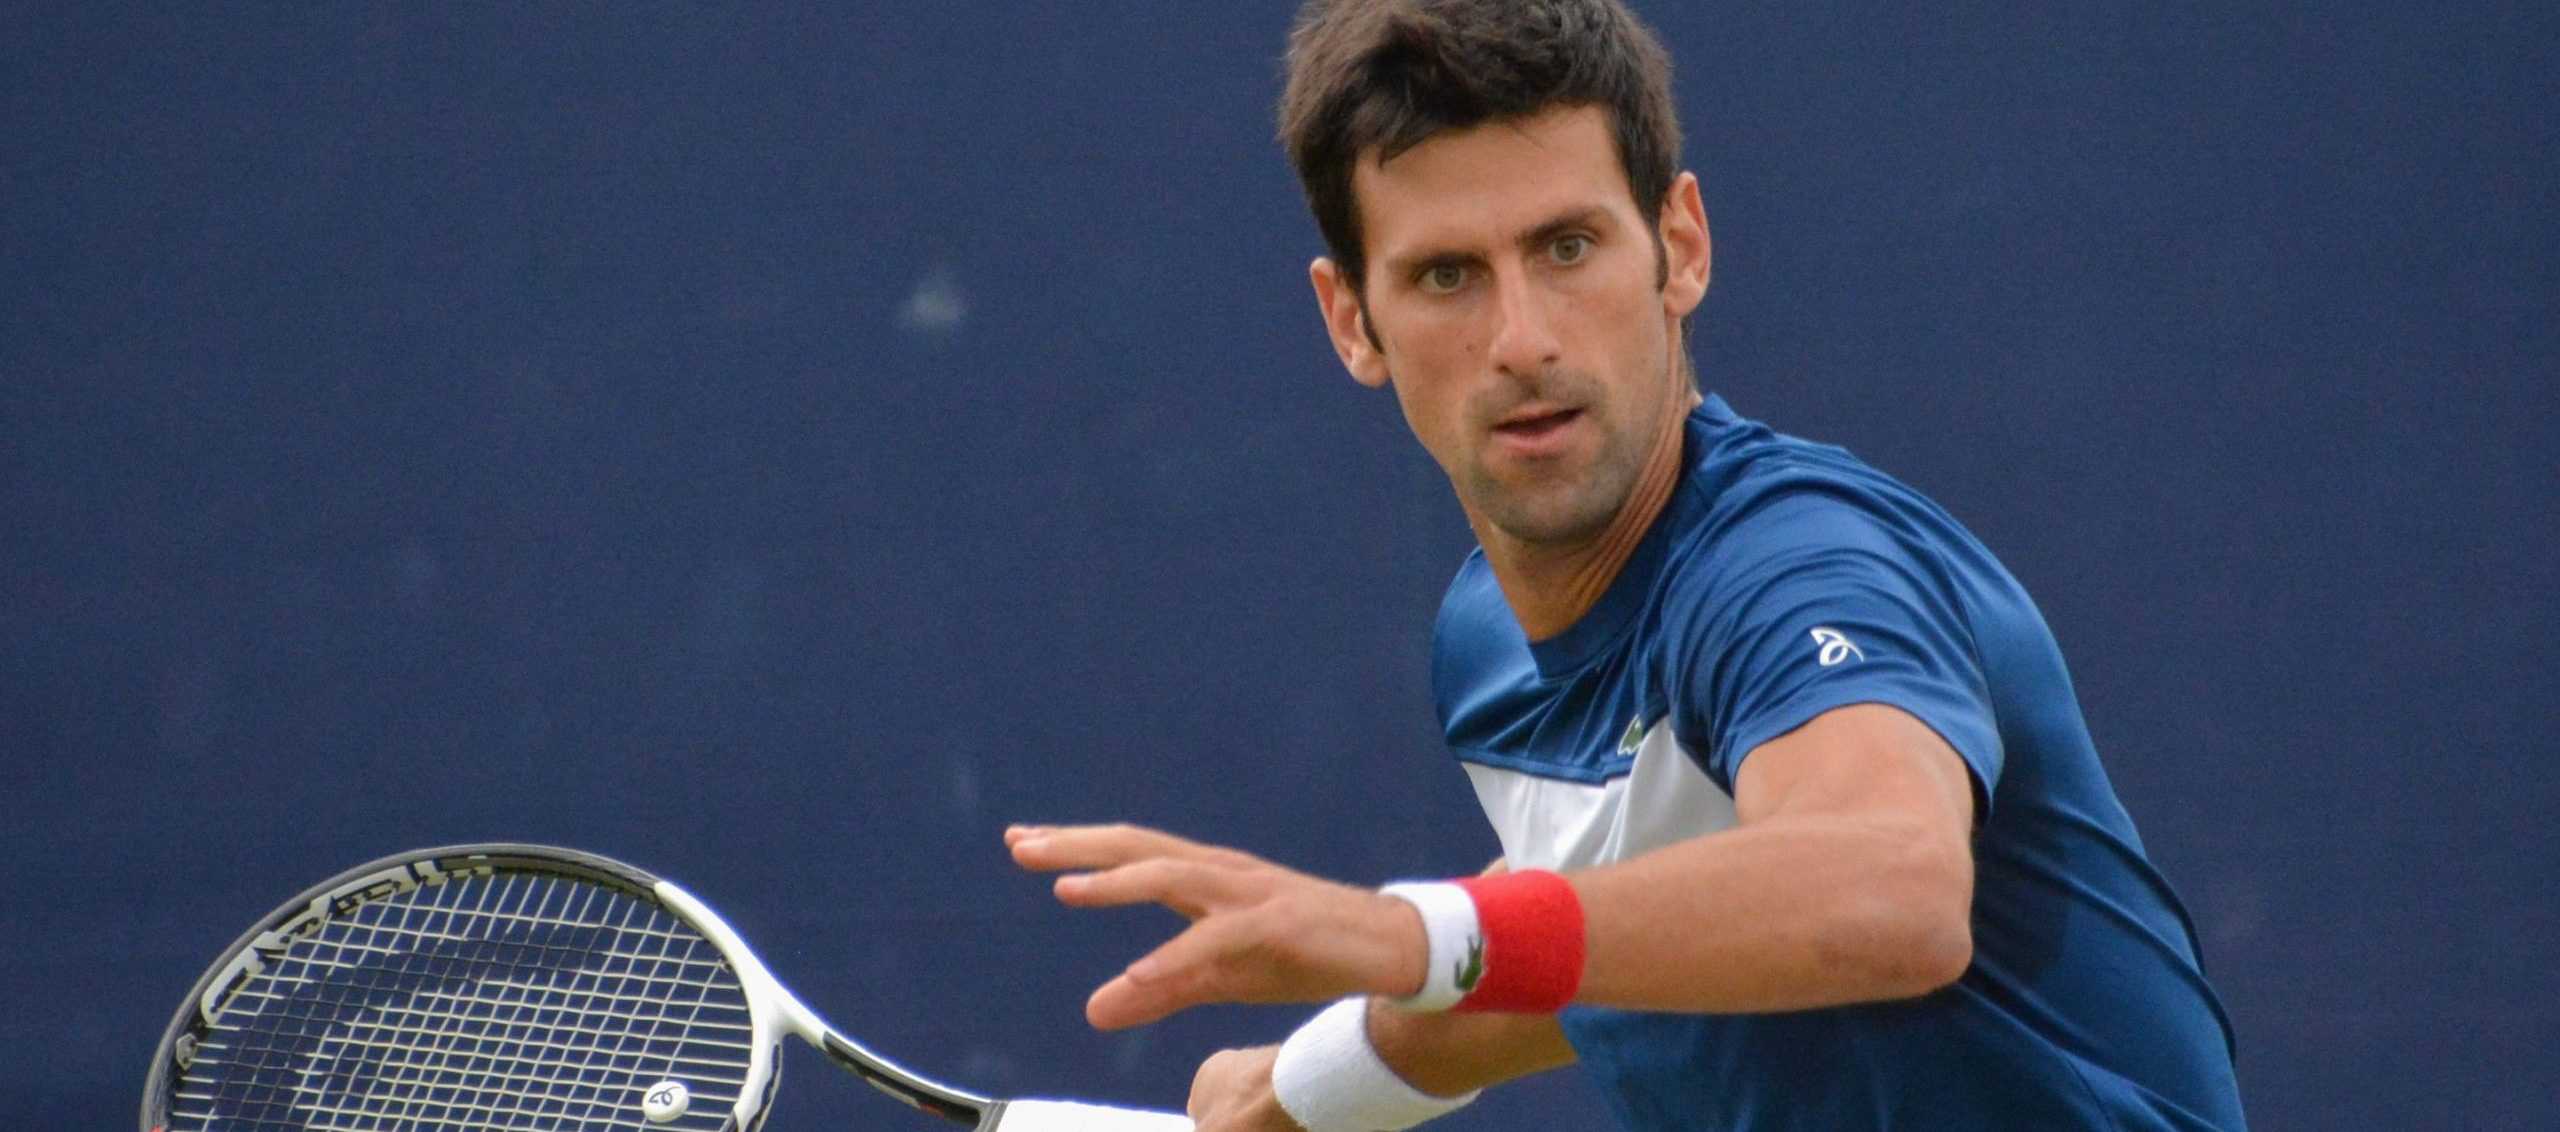 Novak Djokovic wins in style and we check out the champion’s closet